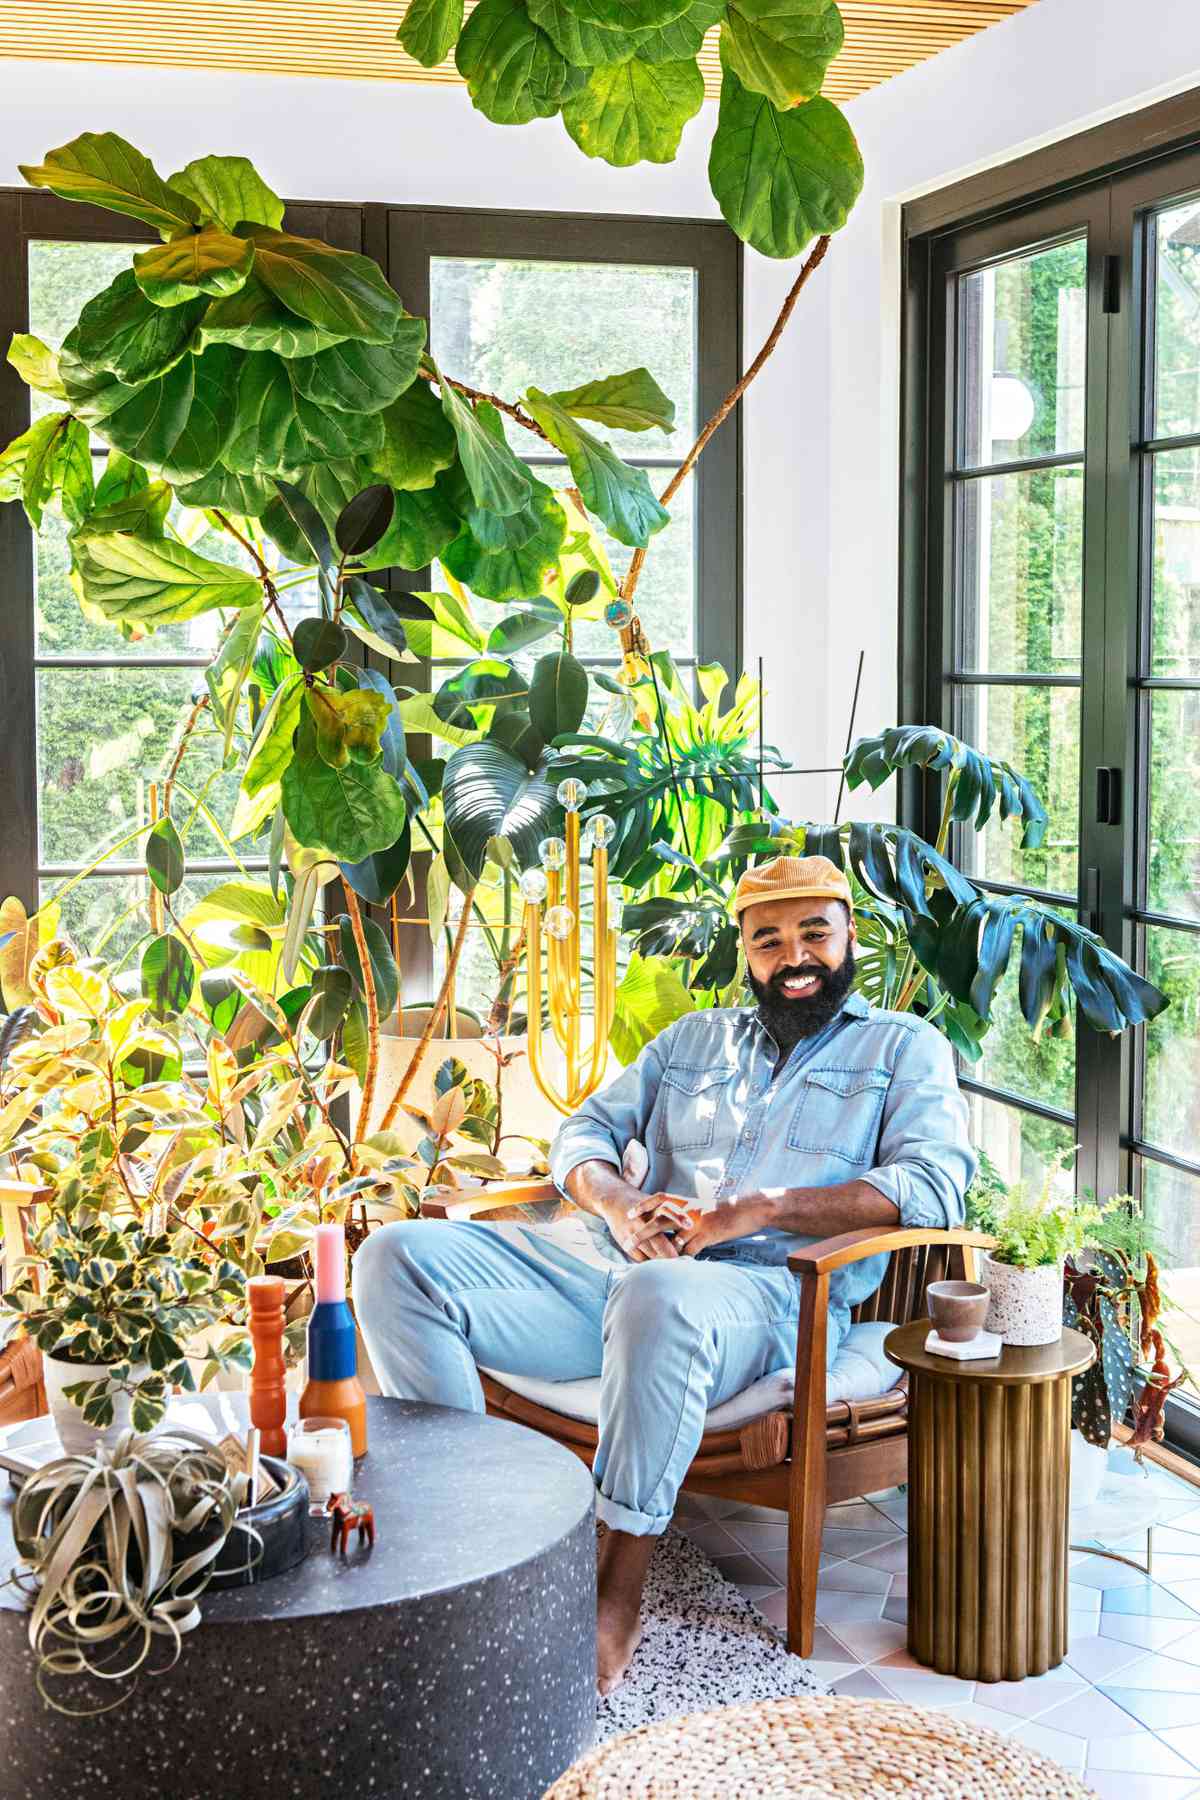 Hilton Carter at home in Baltimore, MD with his houseplants